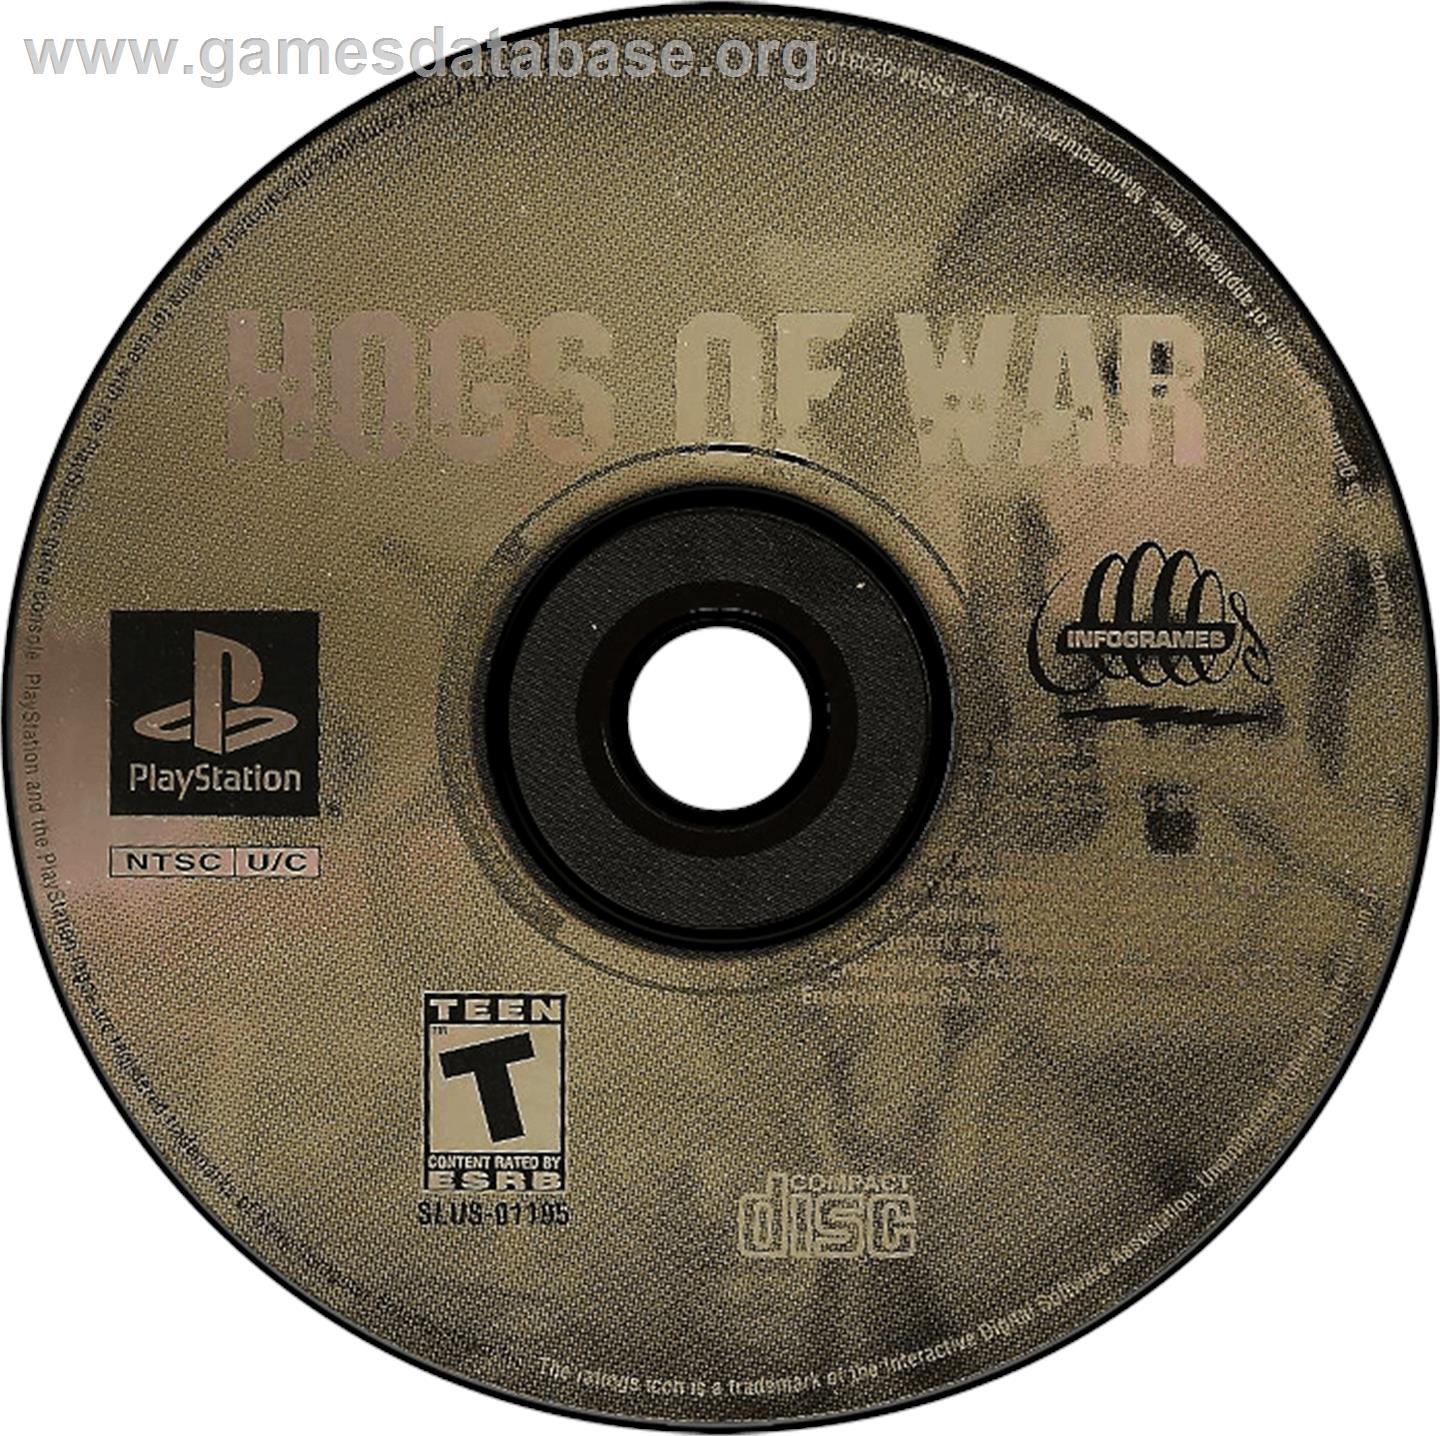 Hogs of War / Worms - Sony Playstation - Artwork - Disc